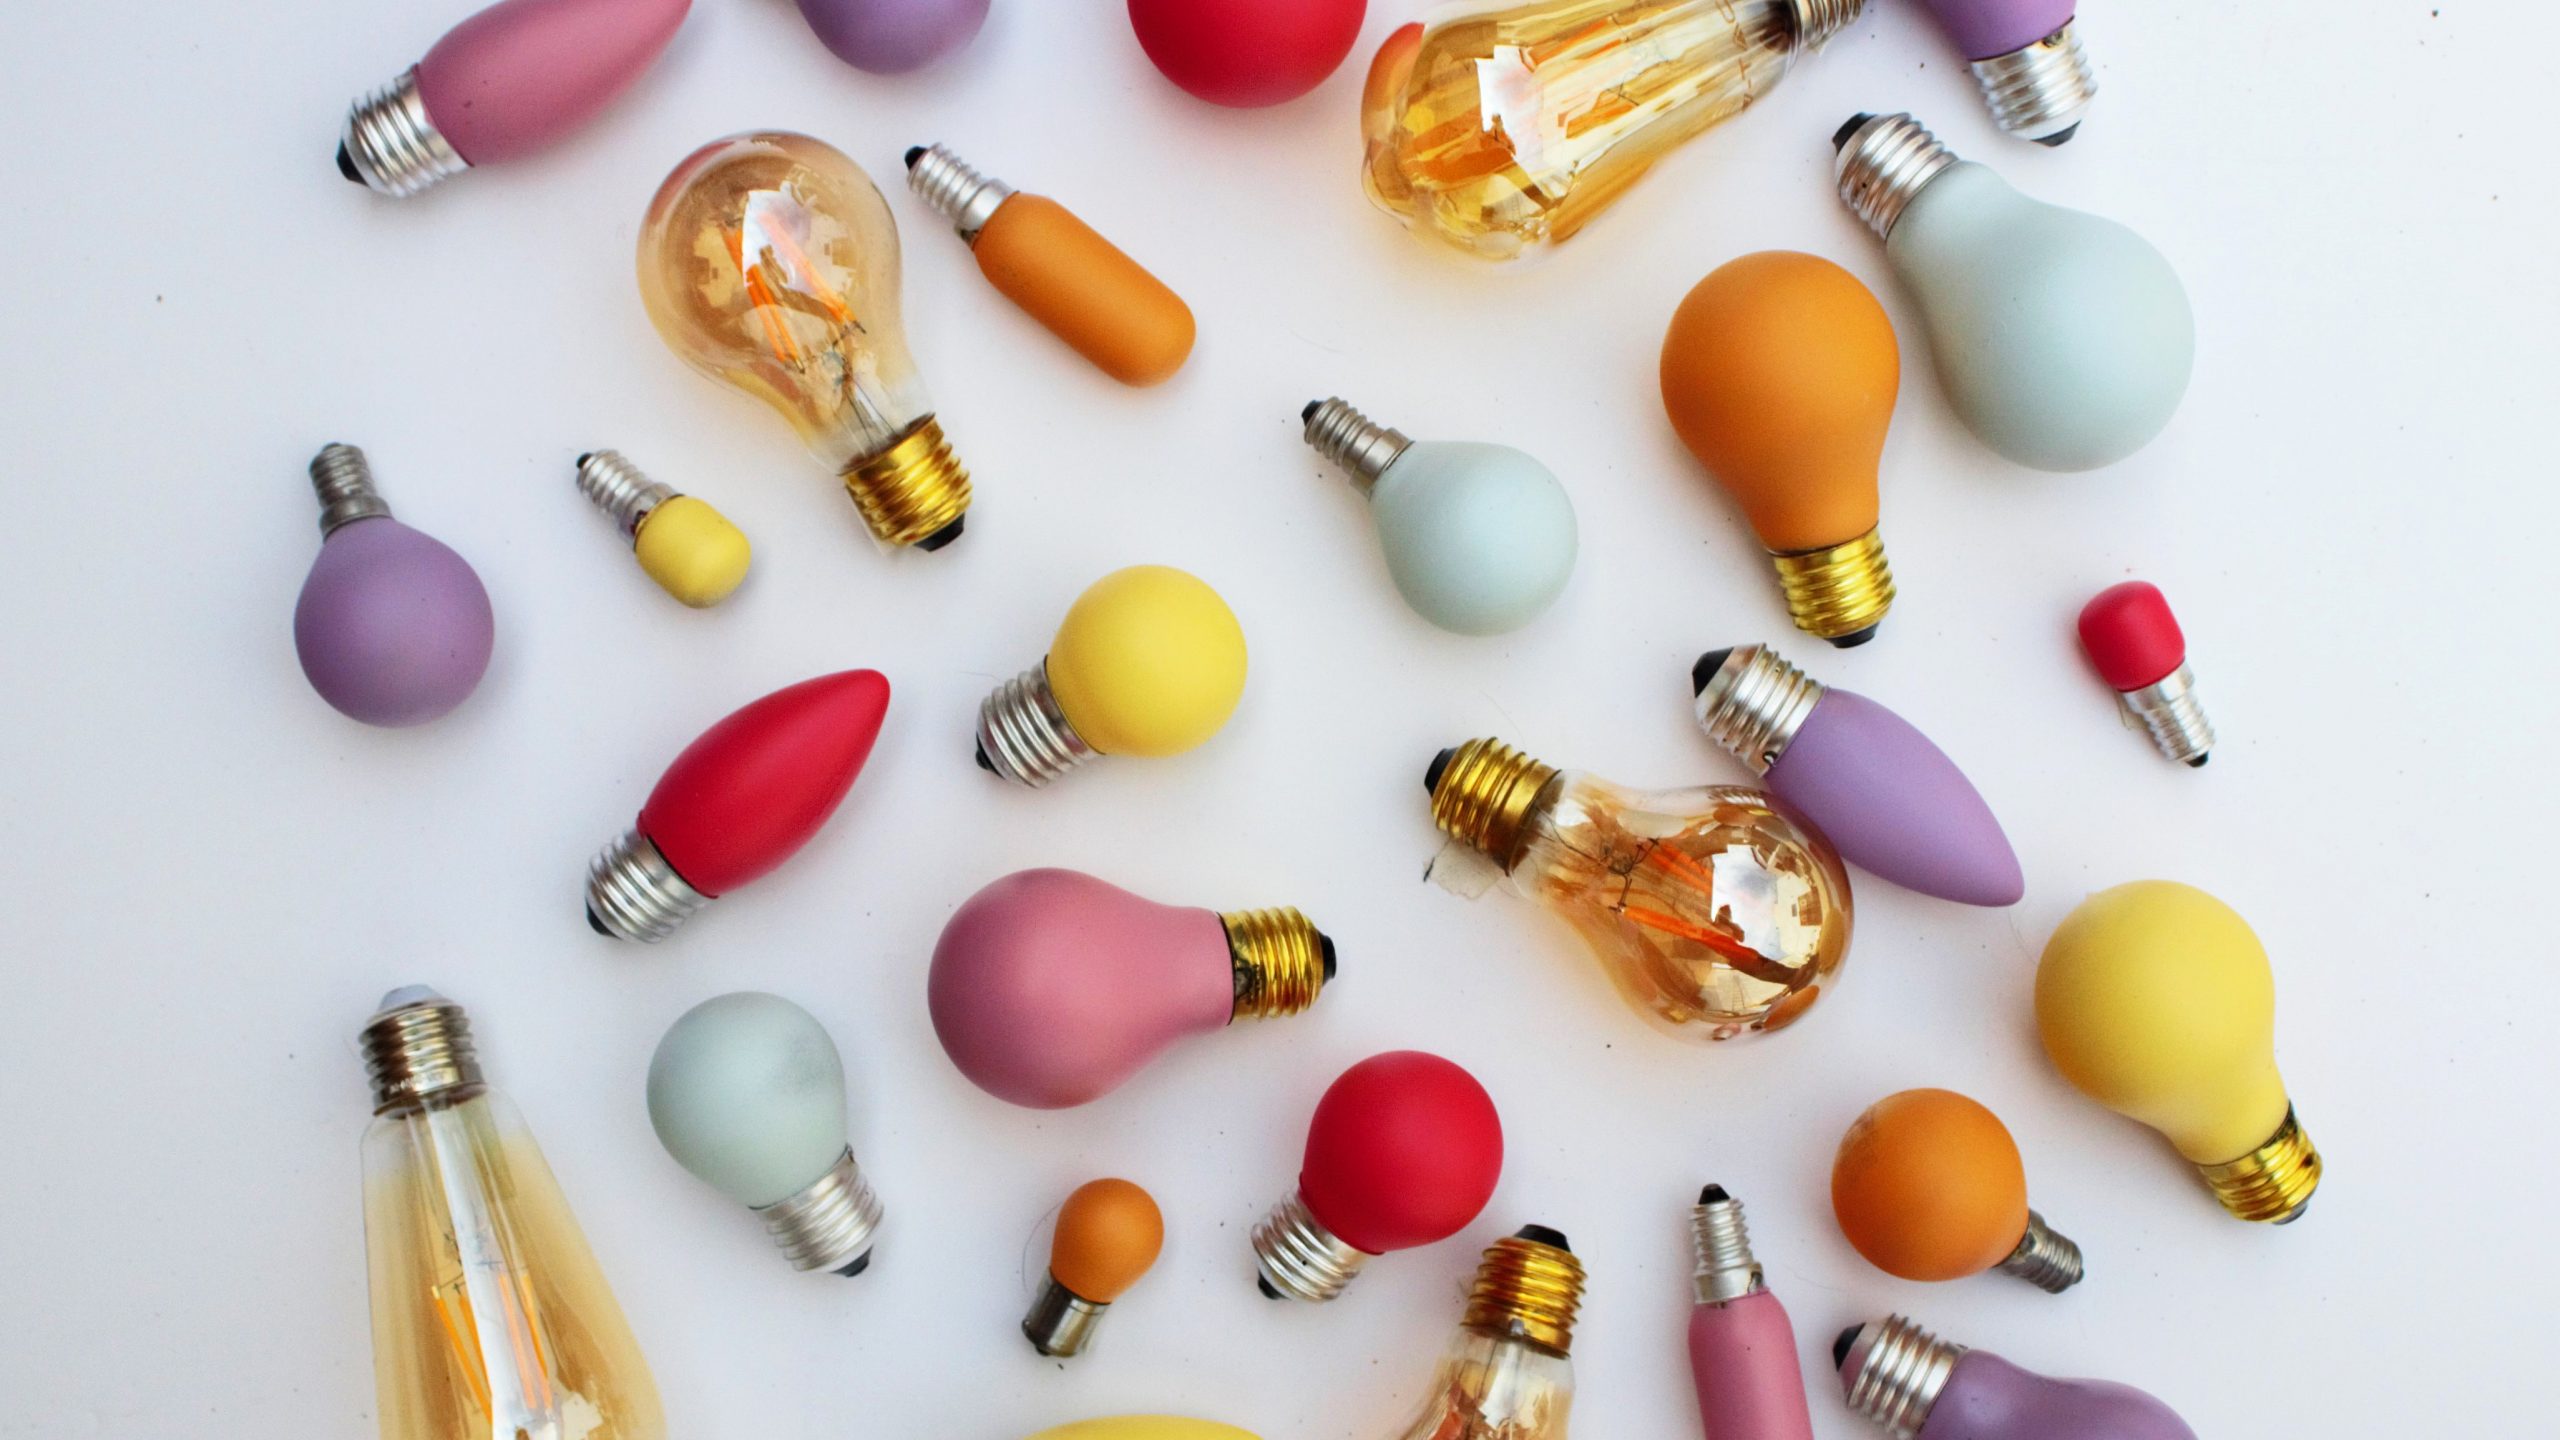 Flatlay photograph featuring brightly coloured lightbulbs in different shapes and sizes.